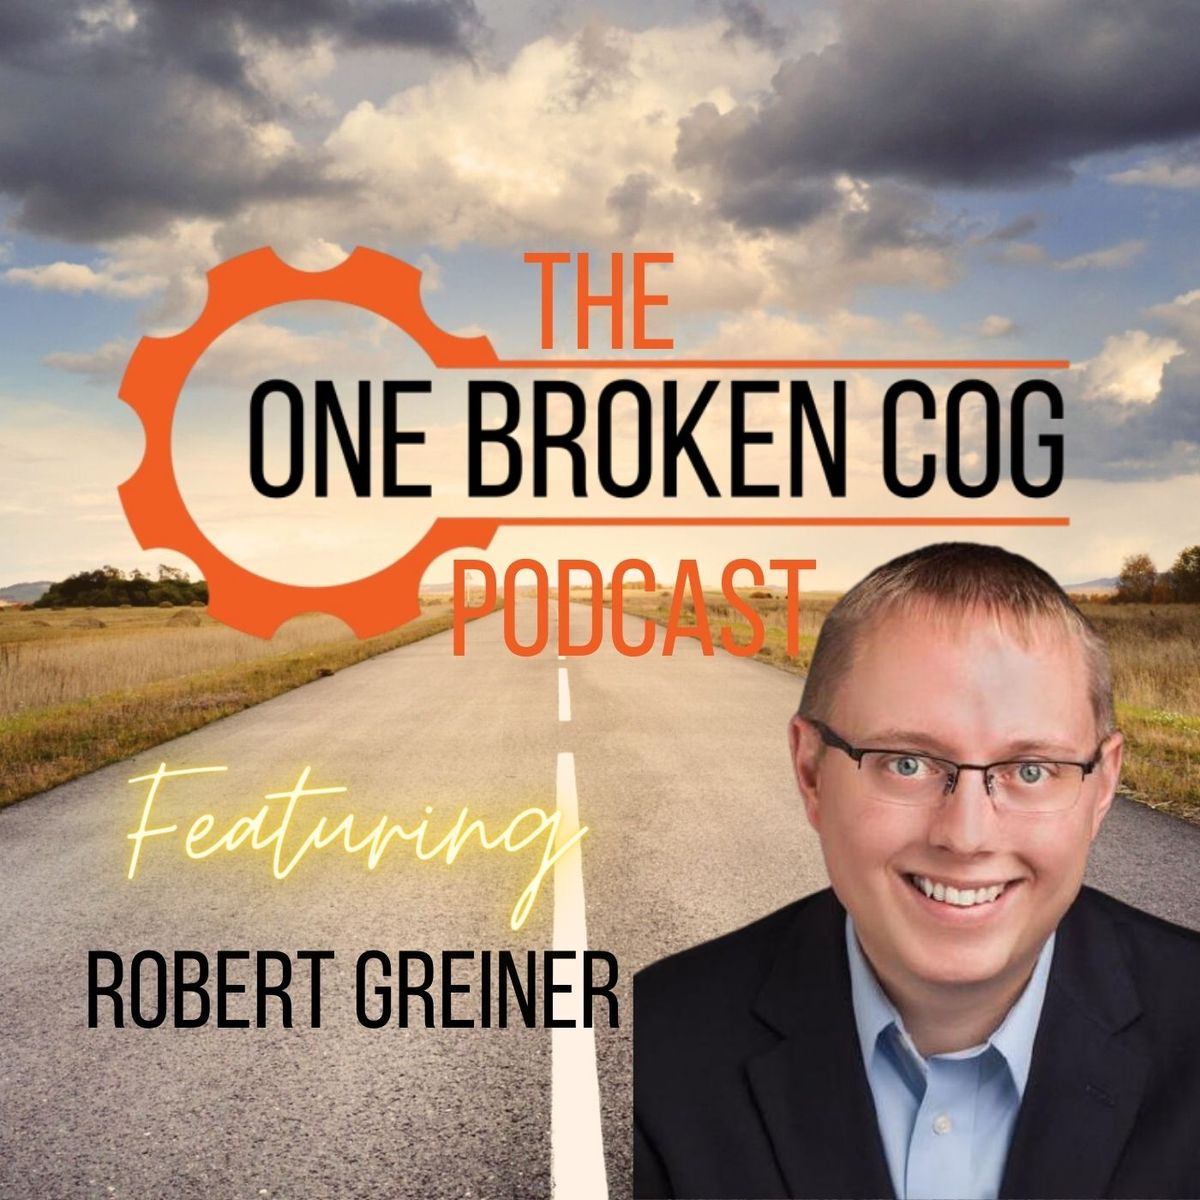 Interview: The One Broken Cog Podcast